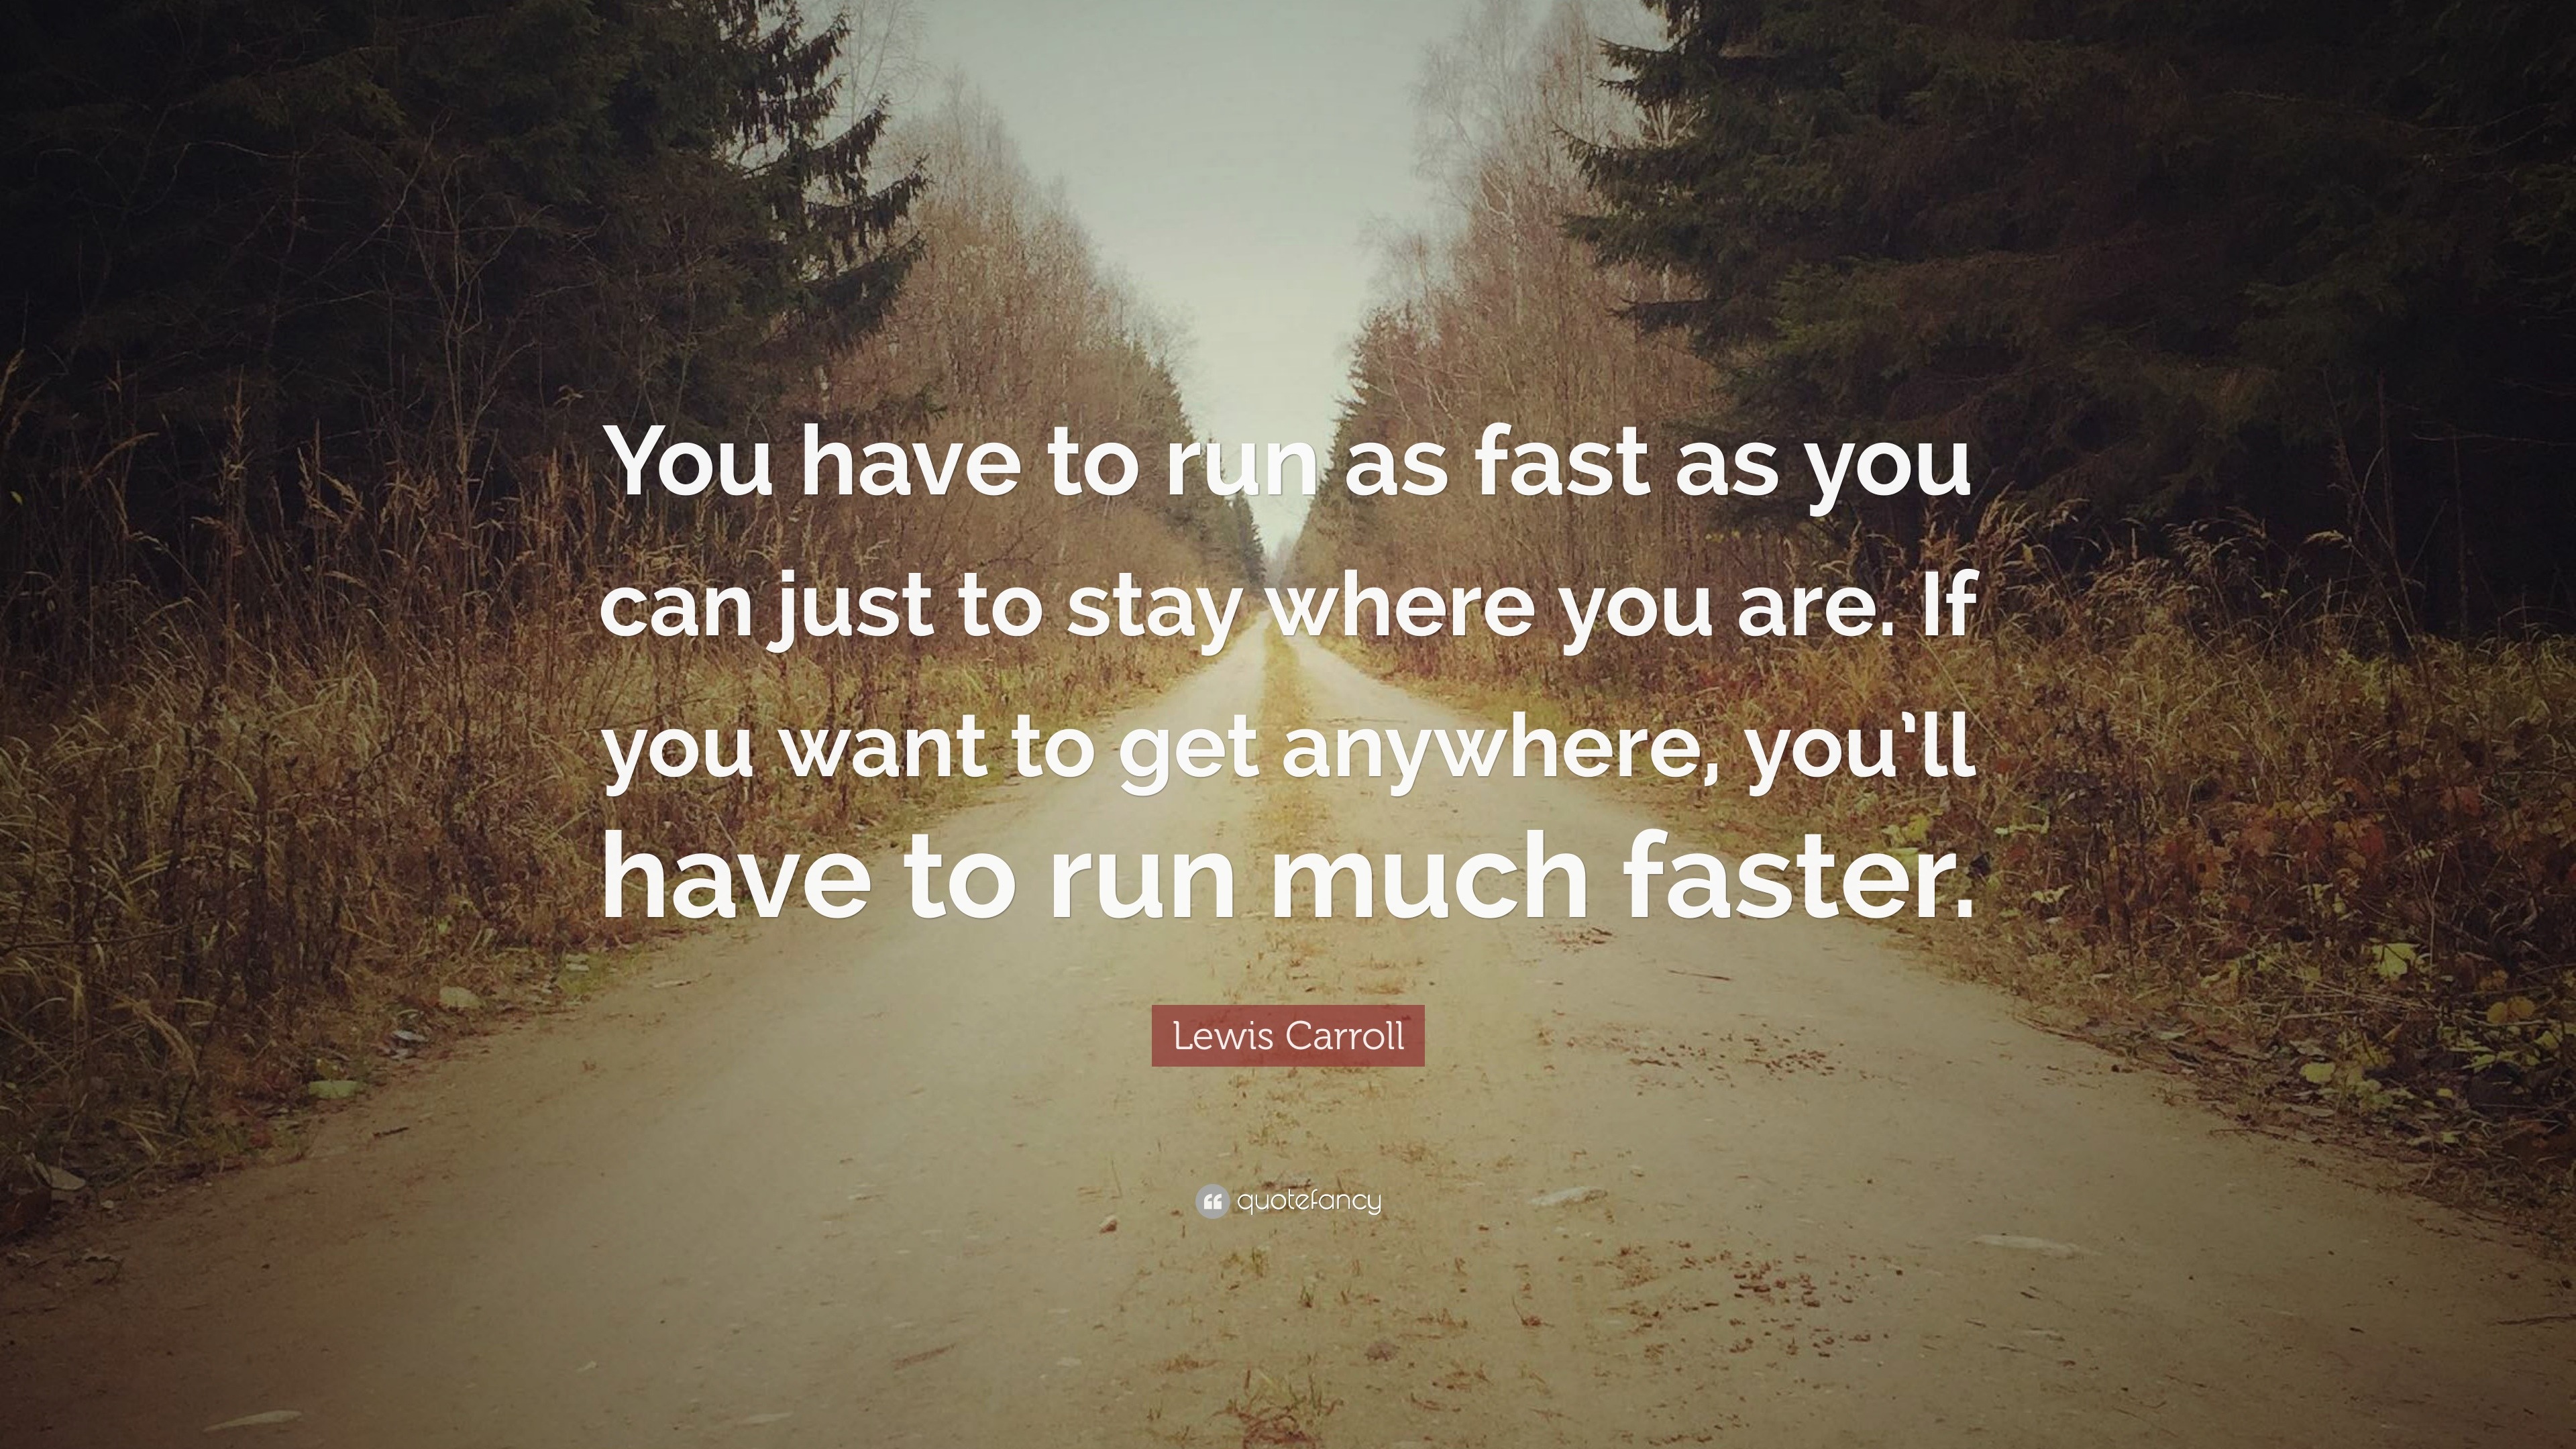 Lewis Carroll Quote: “You have to run as fast as you can just to stay where  you are. If you want to get anywhere, you'll have to run much fast”